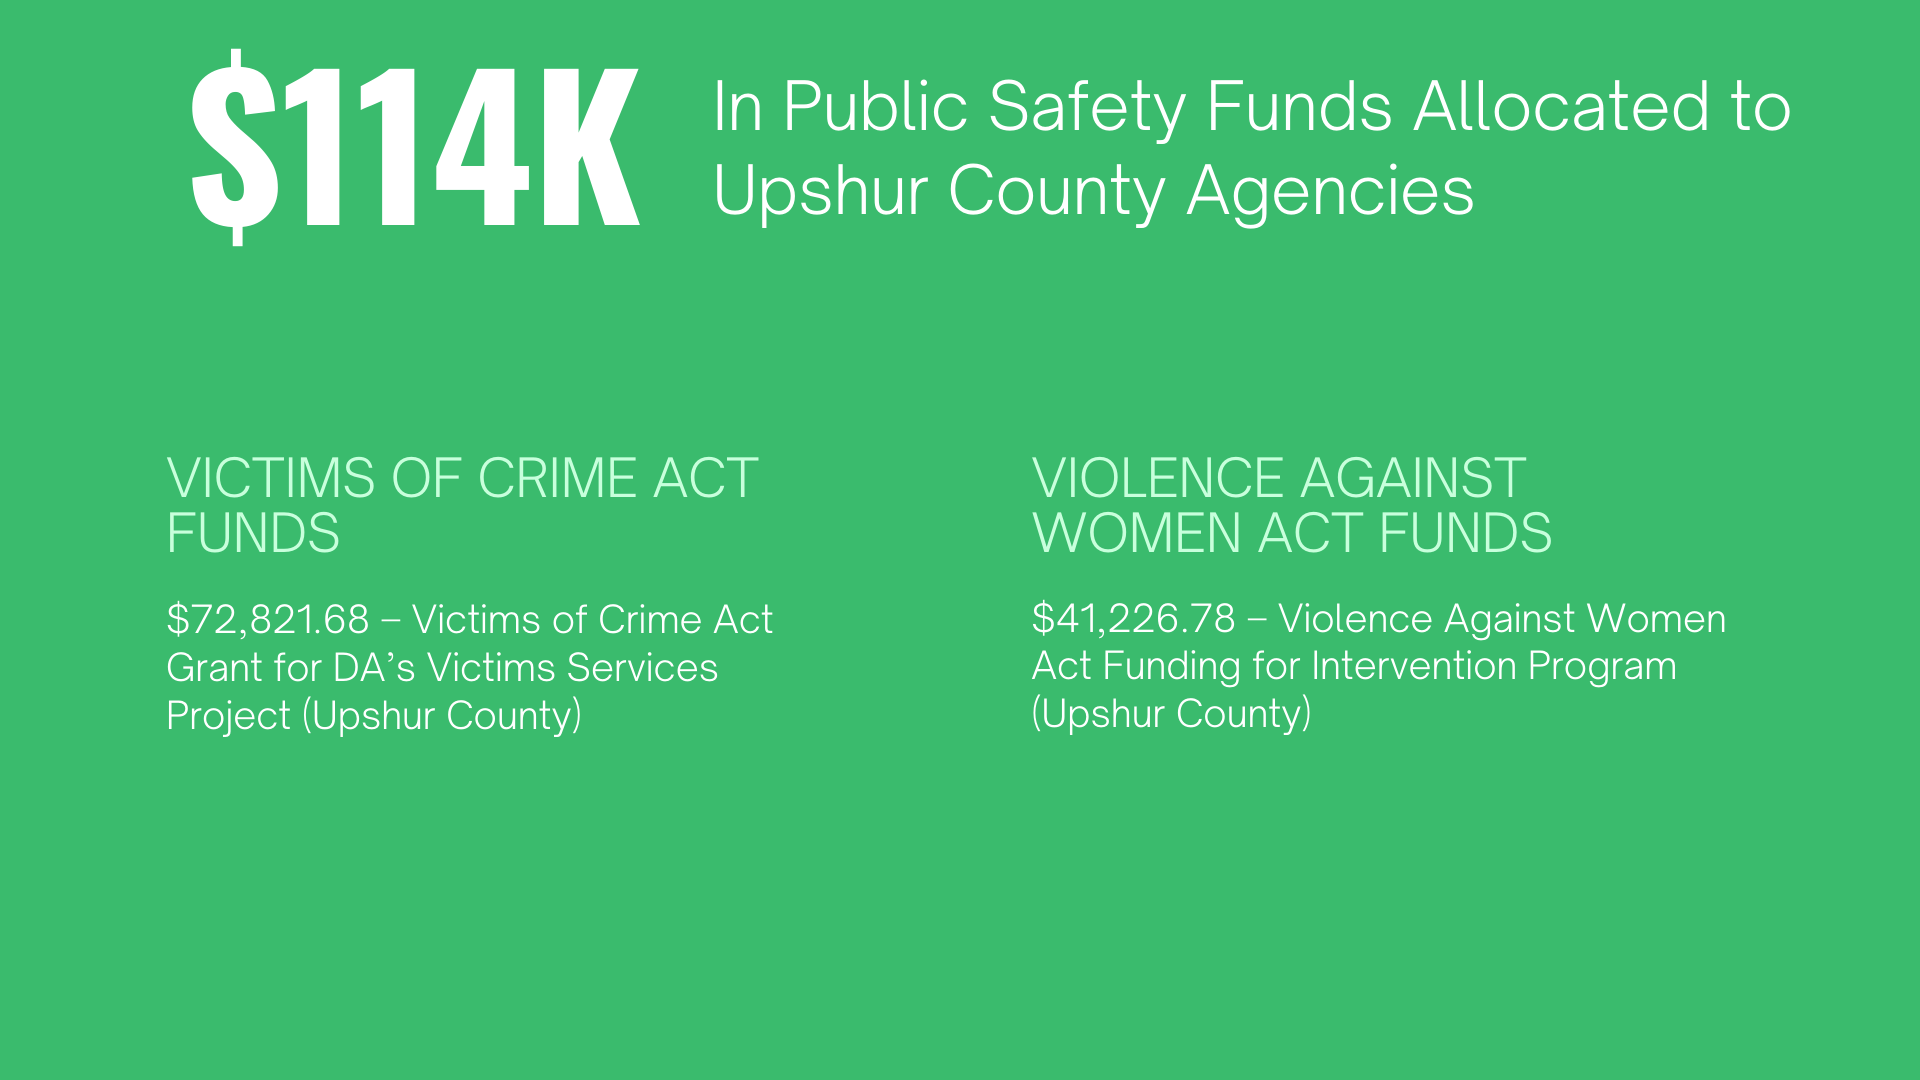 A green background with the words `` in public safety funds allocated to loshur county agencies '' on it.